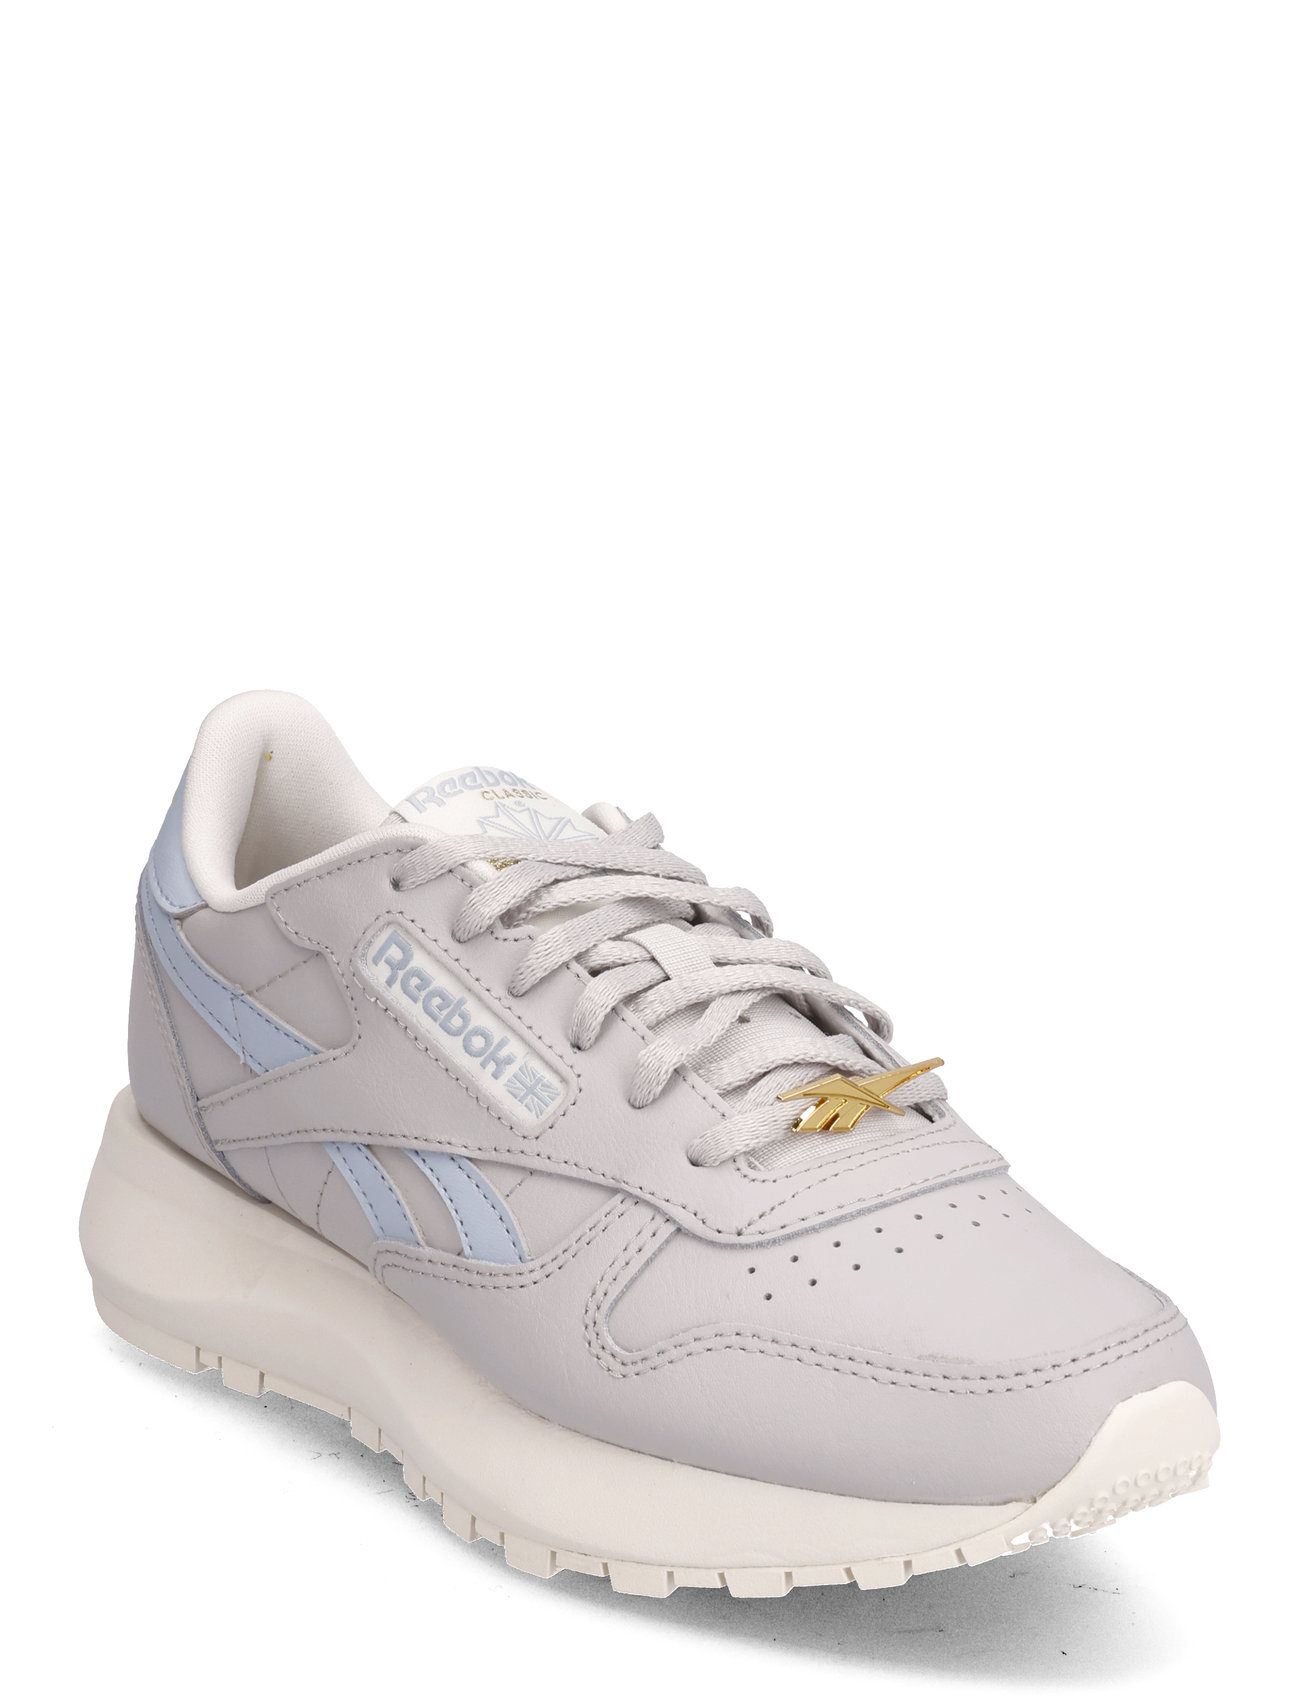 Classic Leather Sp Sport Sneakers Low-top Sneakers Grey Reebok Classics